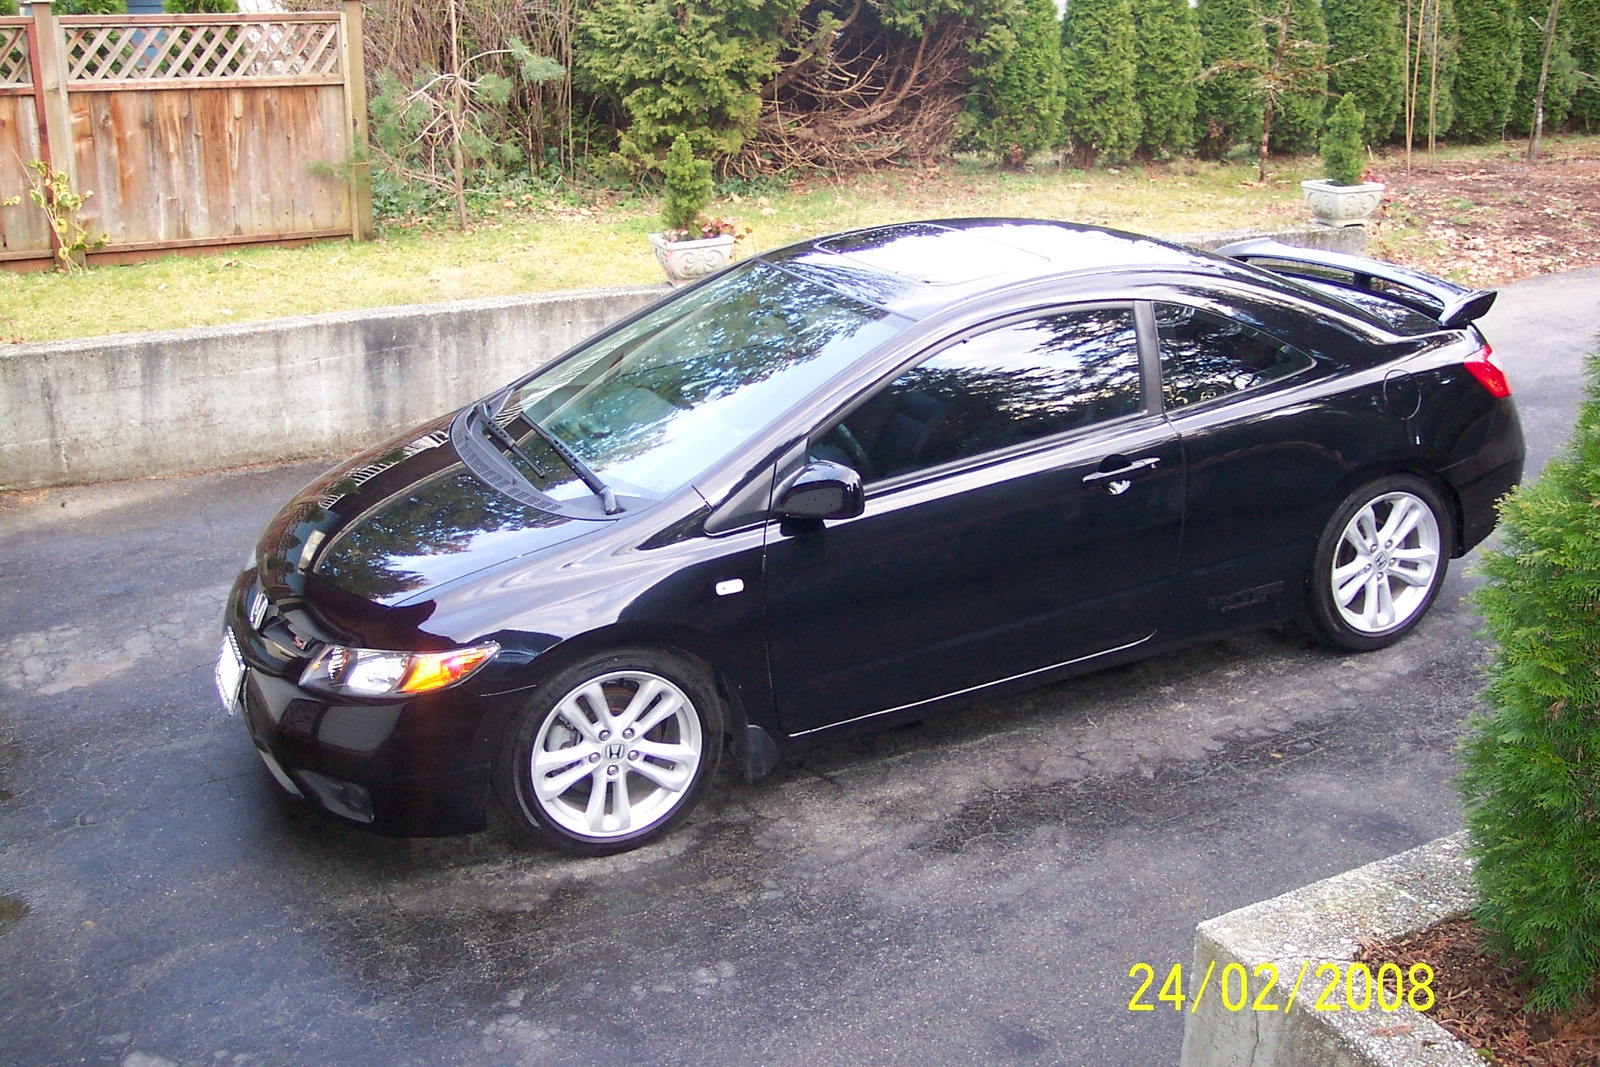 2006 Honda civic for sale in wilmington nc #4